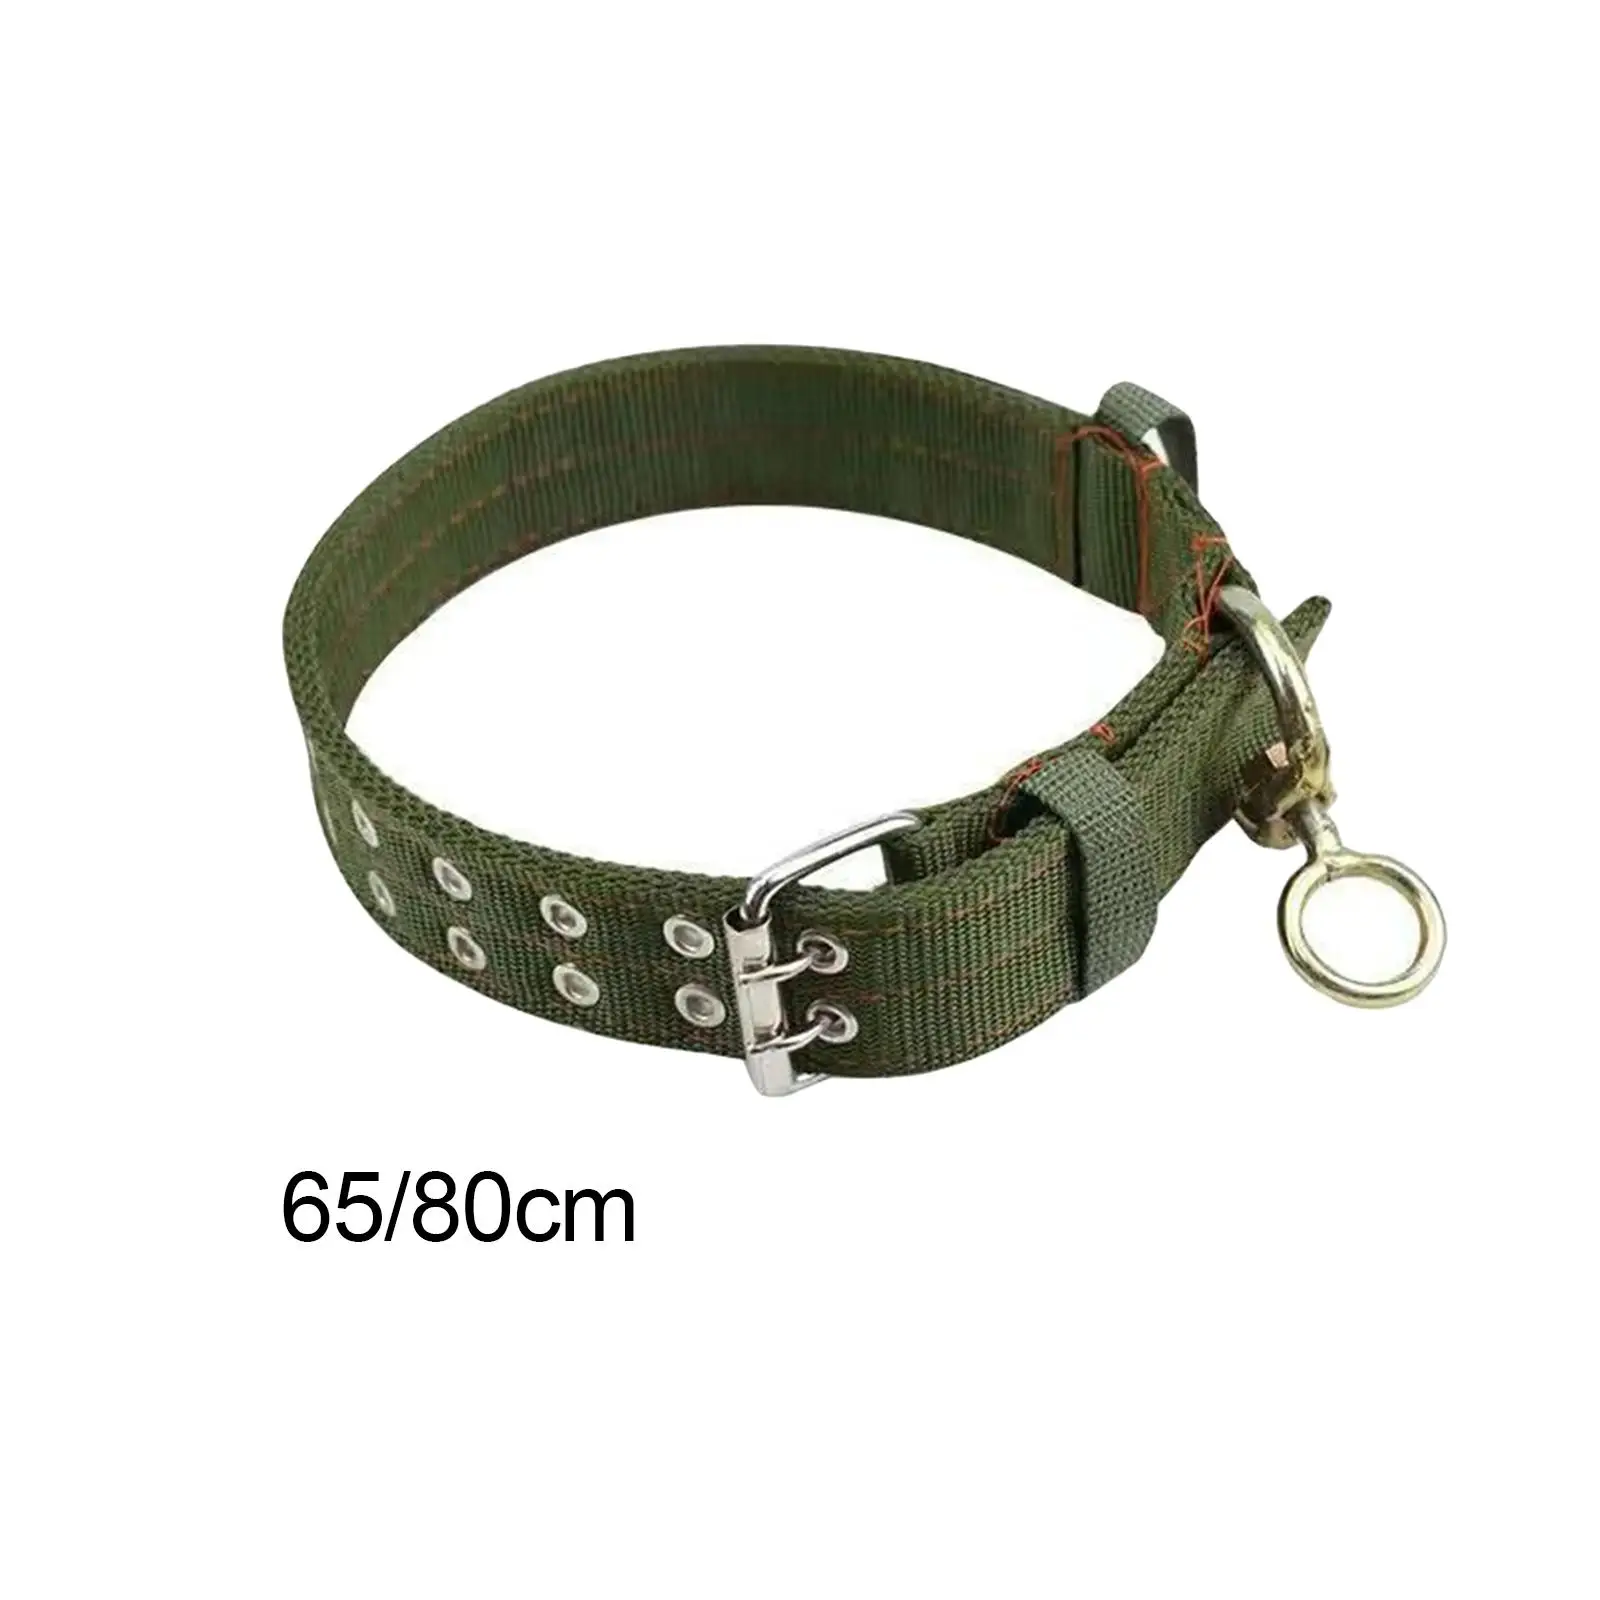 Animals Cattle Collar Canvas Cattle Nose for Sheep Bull Feeding Accessories